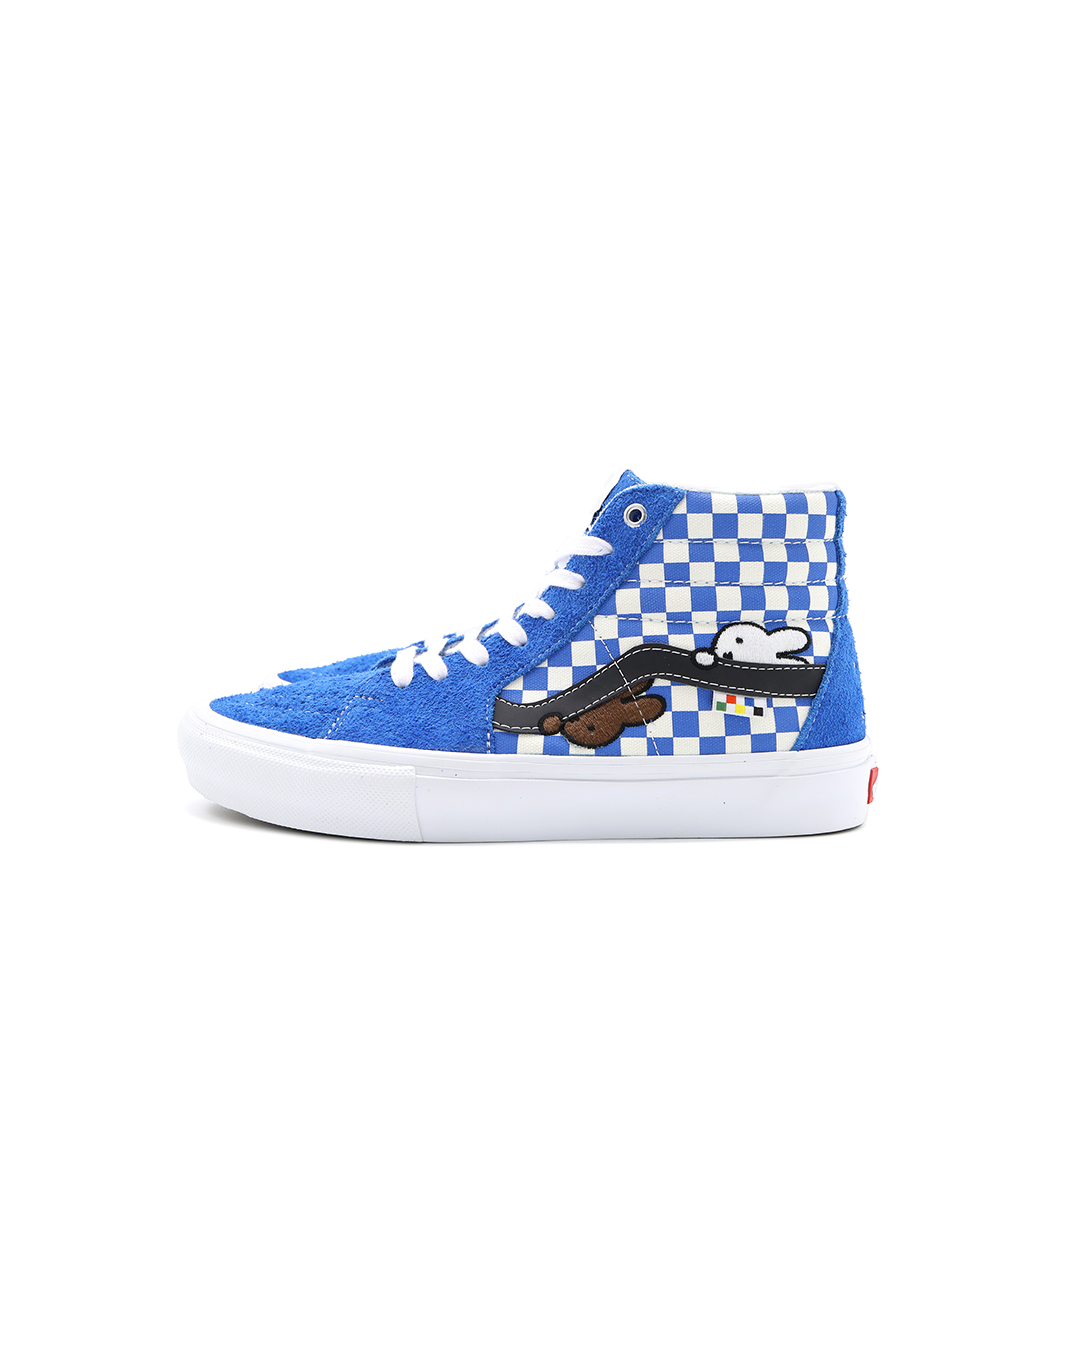 Miffy & Pop by Vans - Pop Trading Company